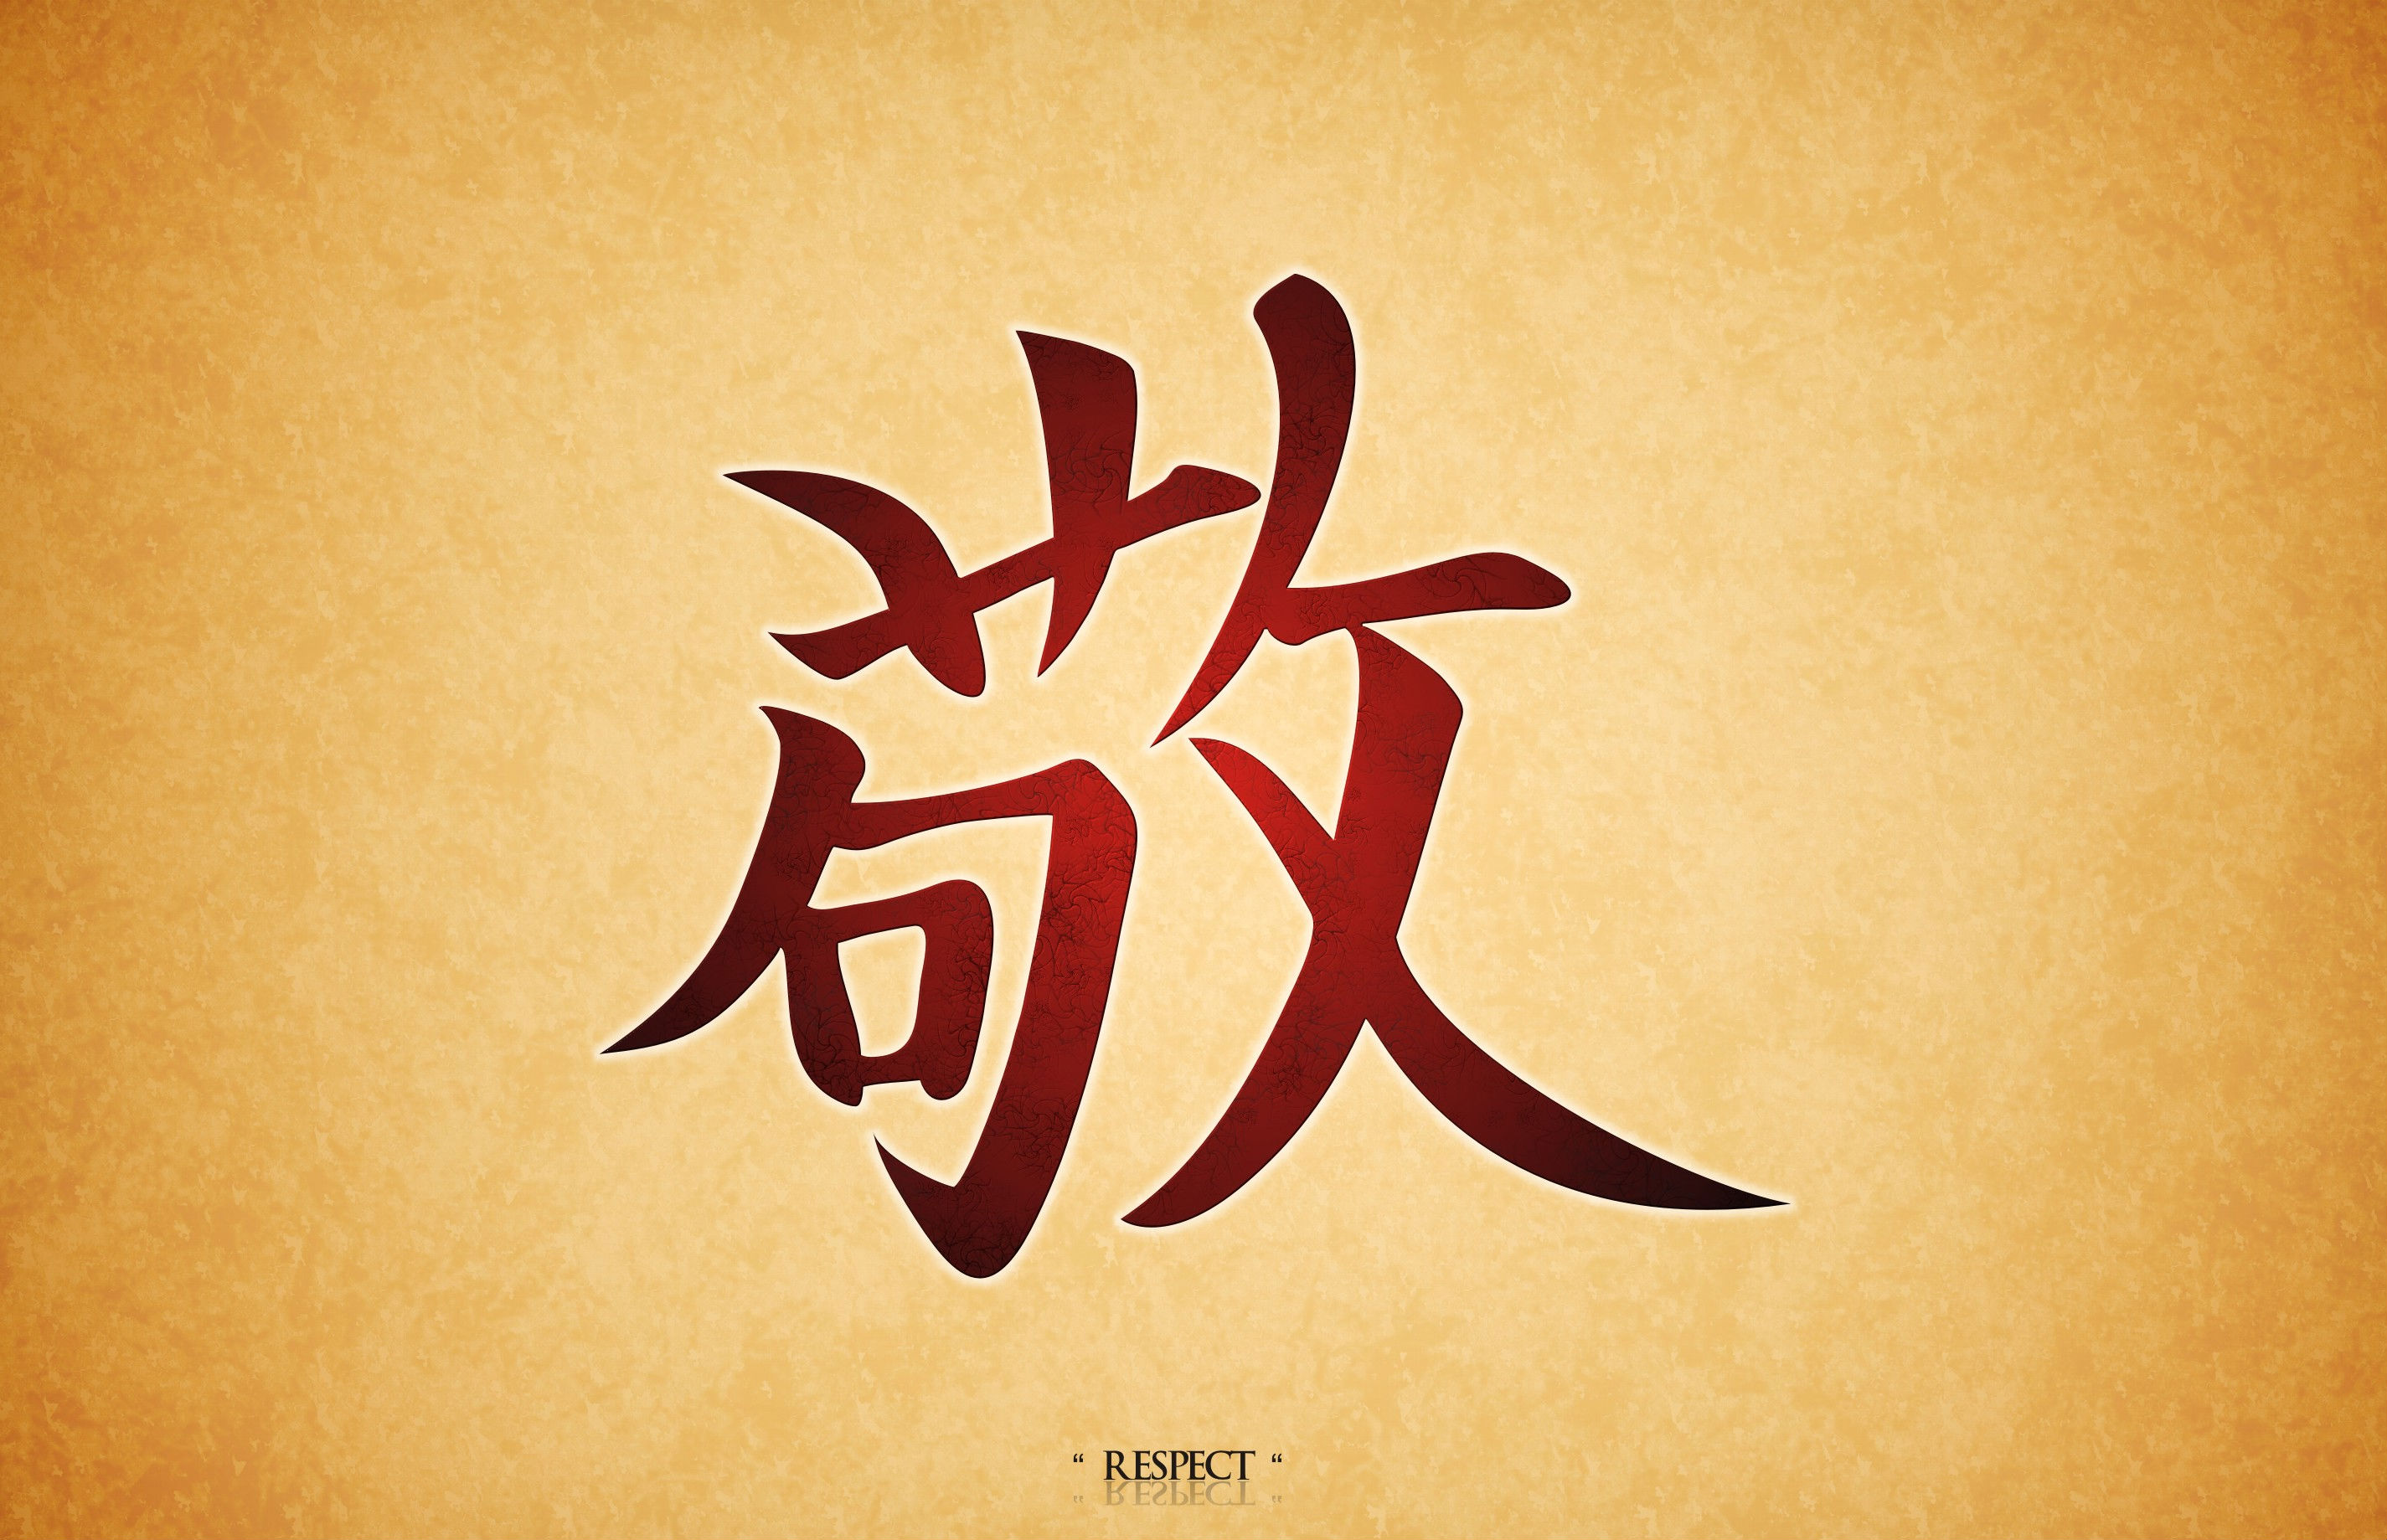 Artistic Calligraphy Wallpaper For Your